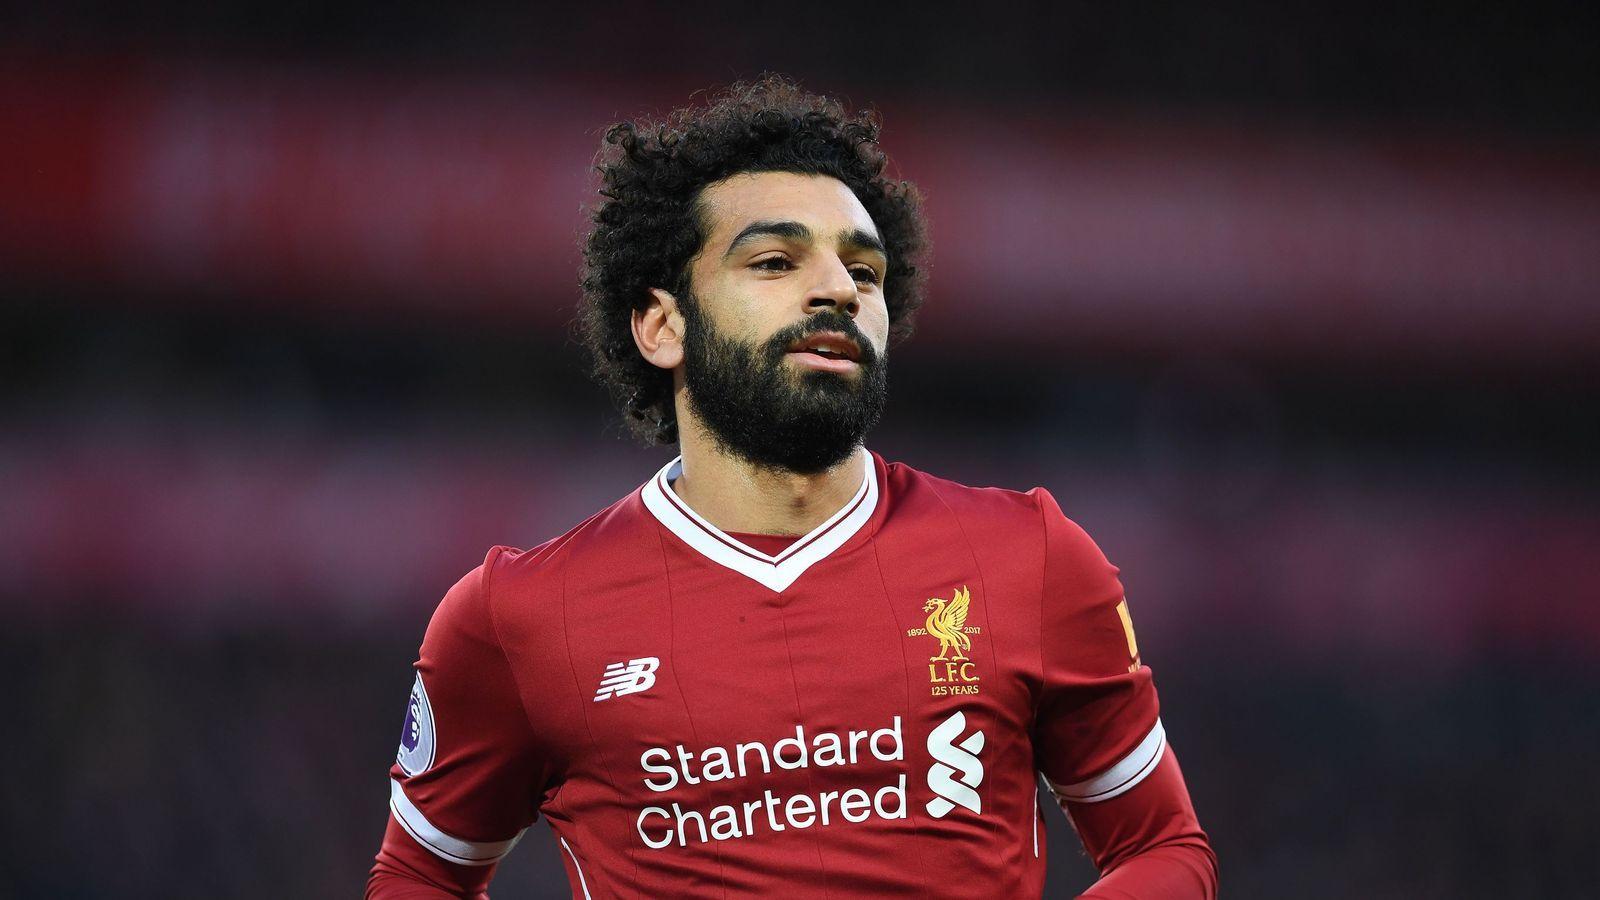 mohamed salah picture download and Background Image HD